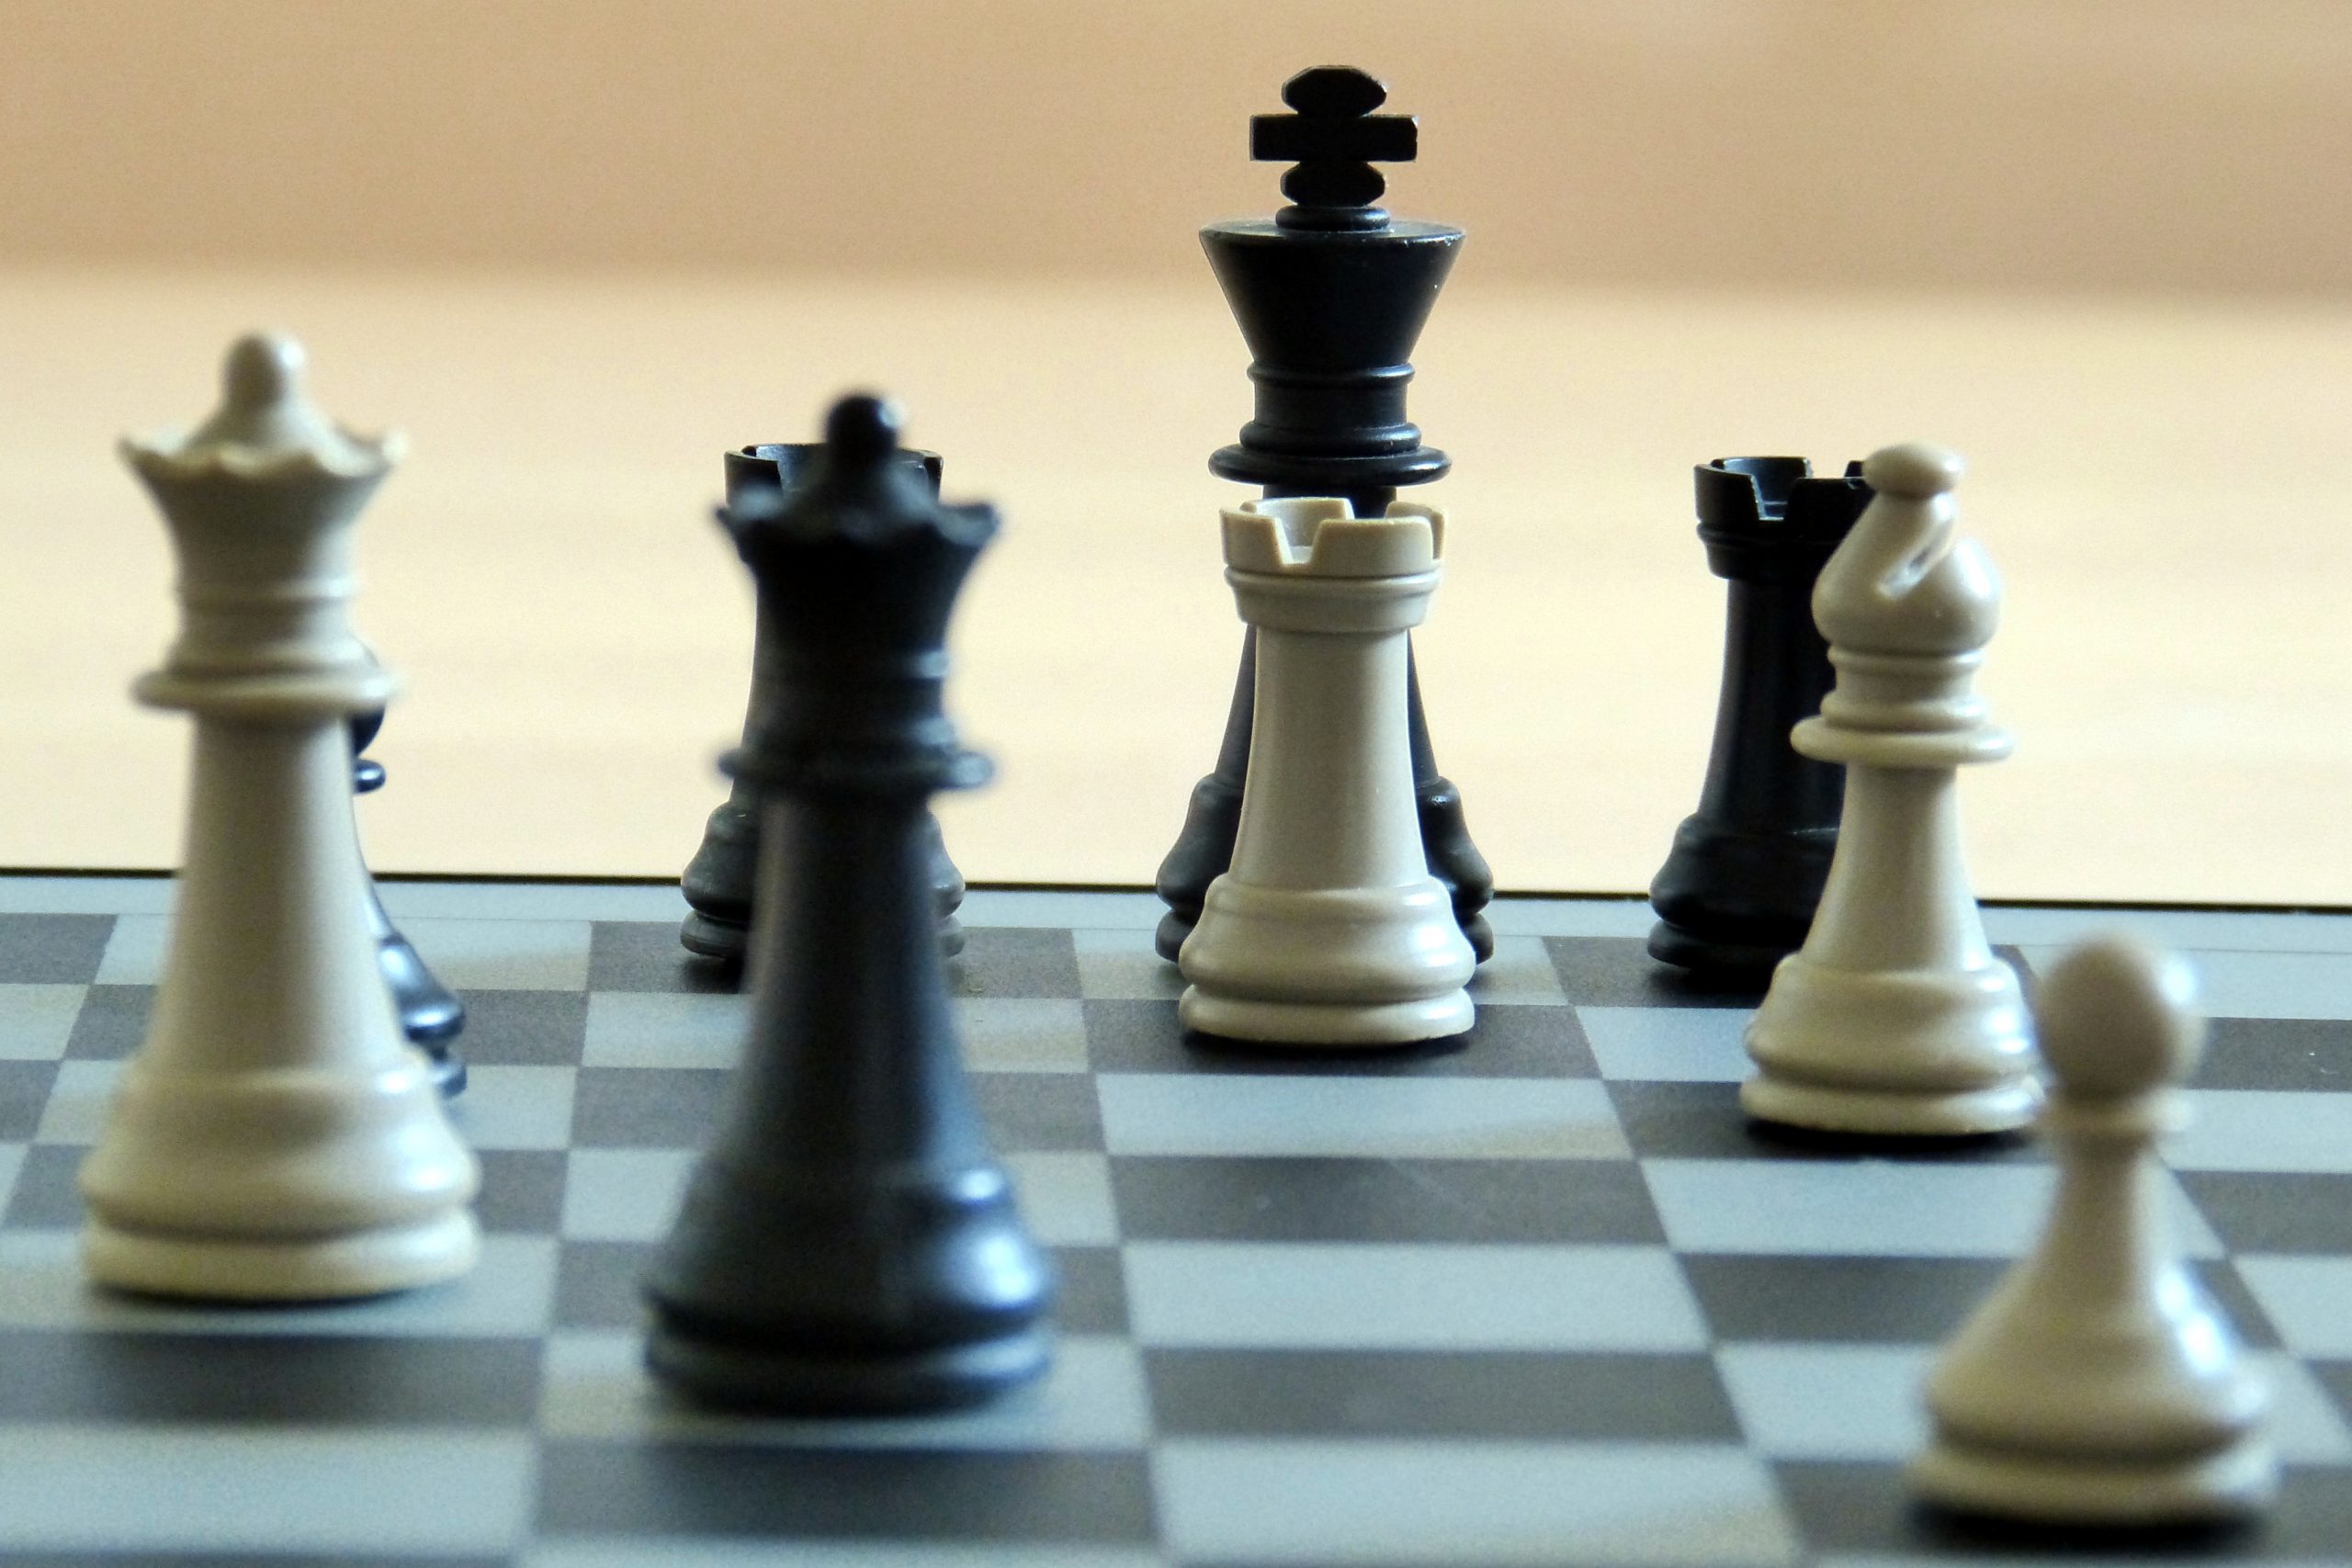 What is chess castling and when can it be performed?